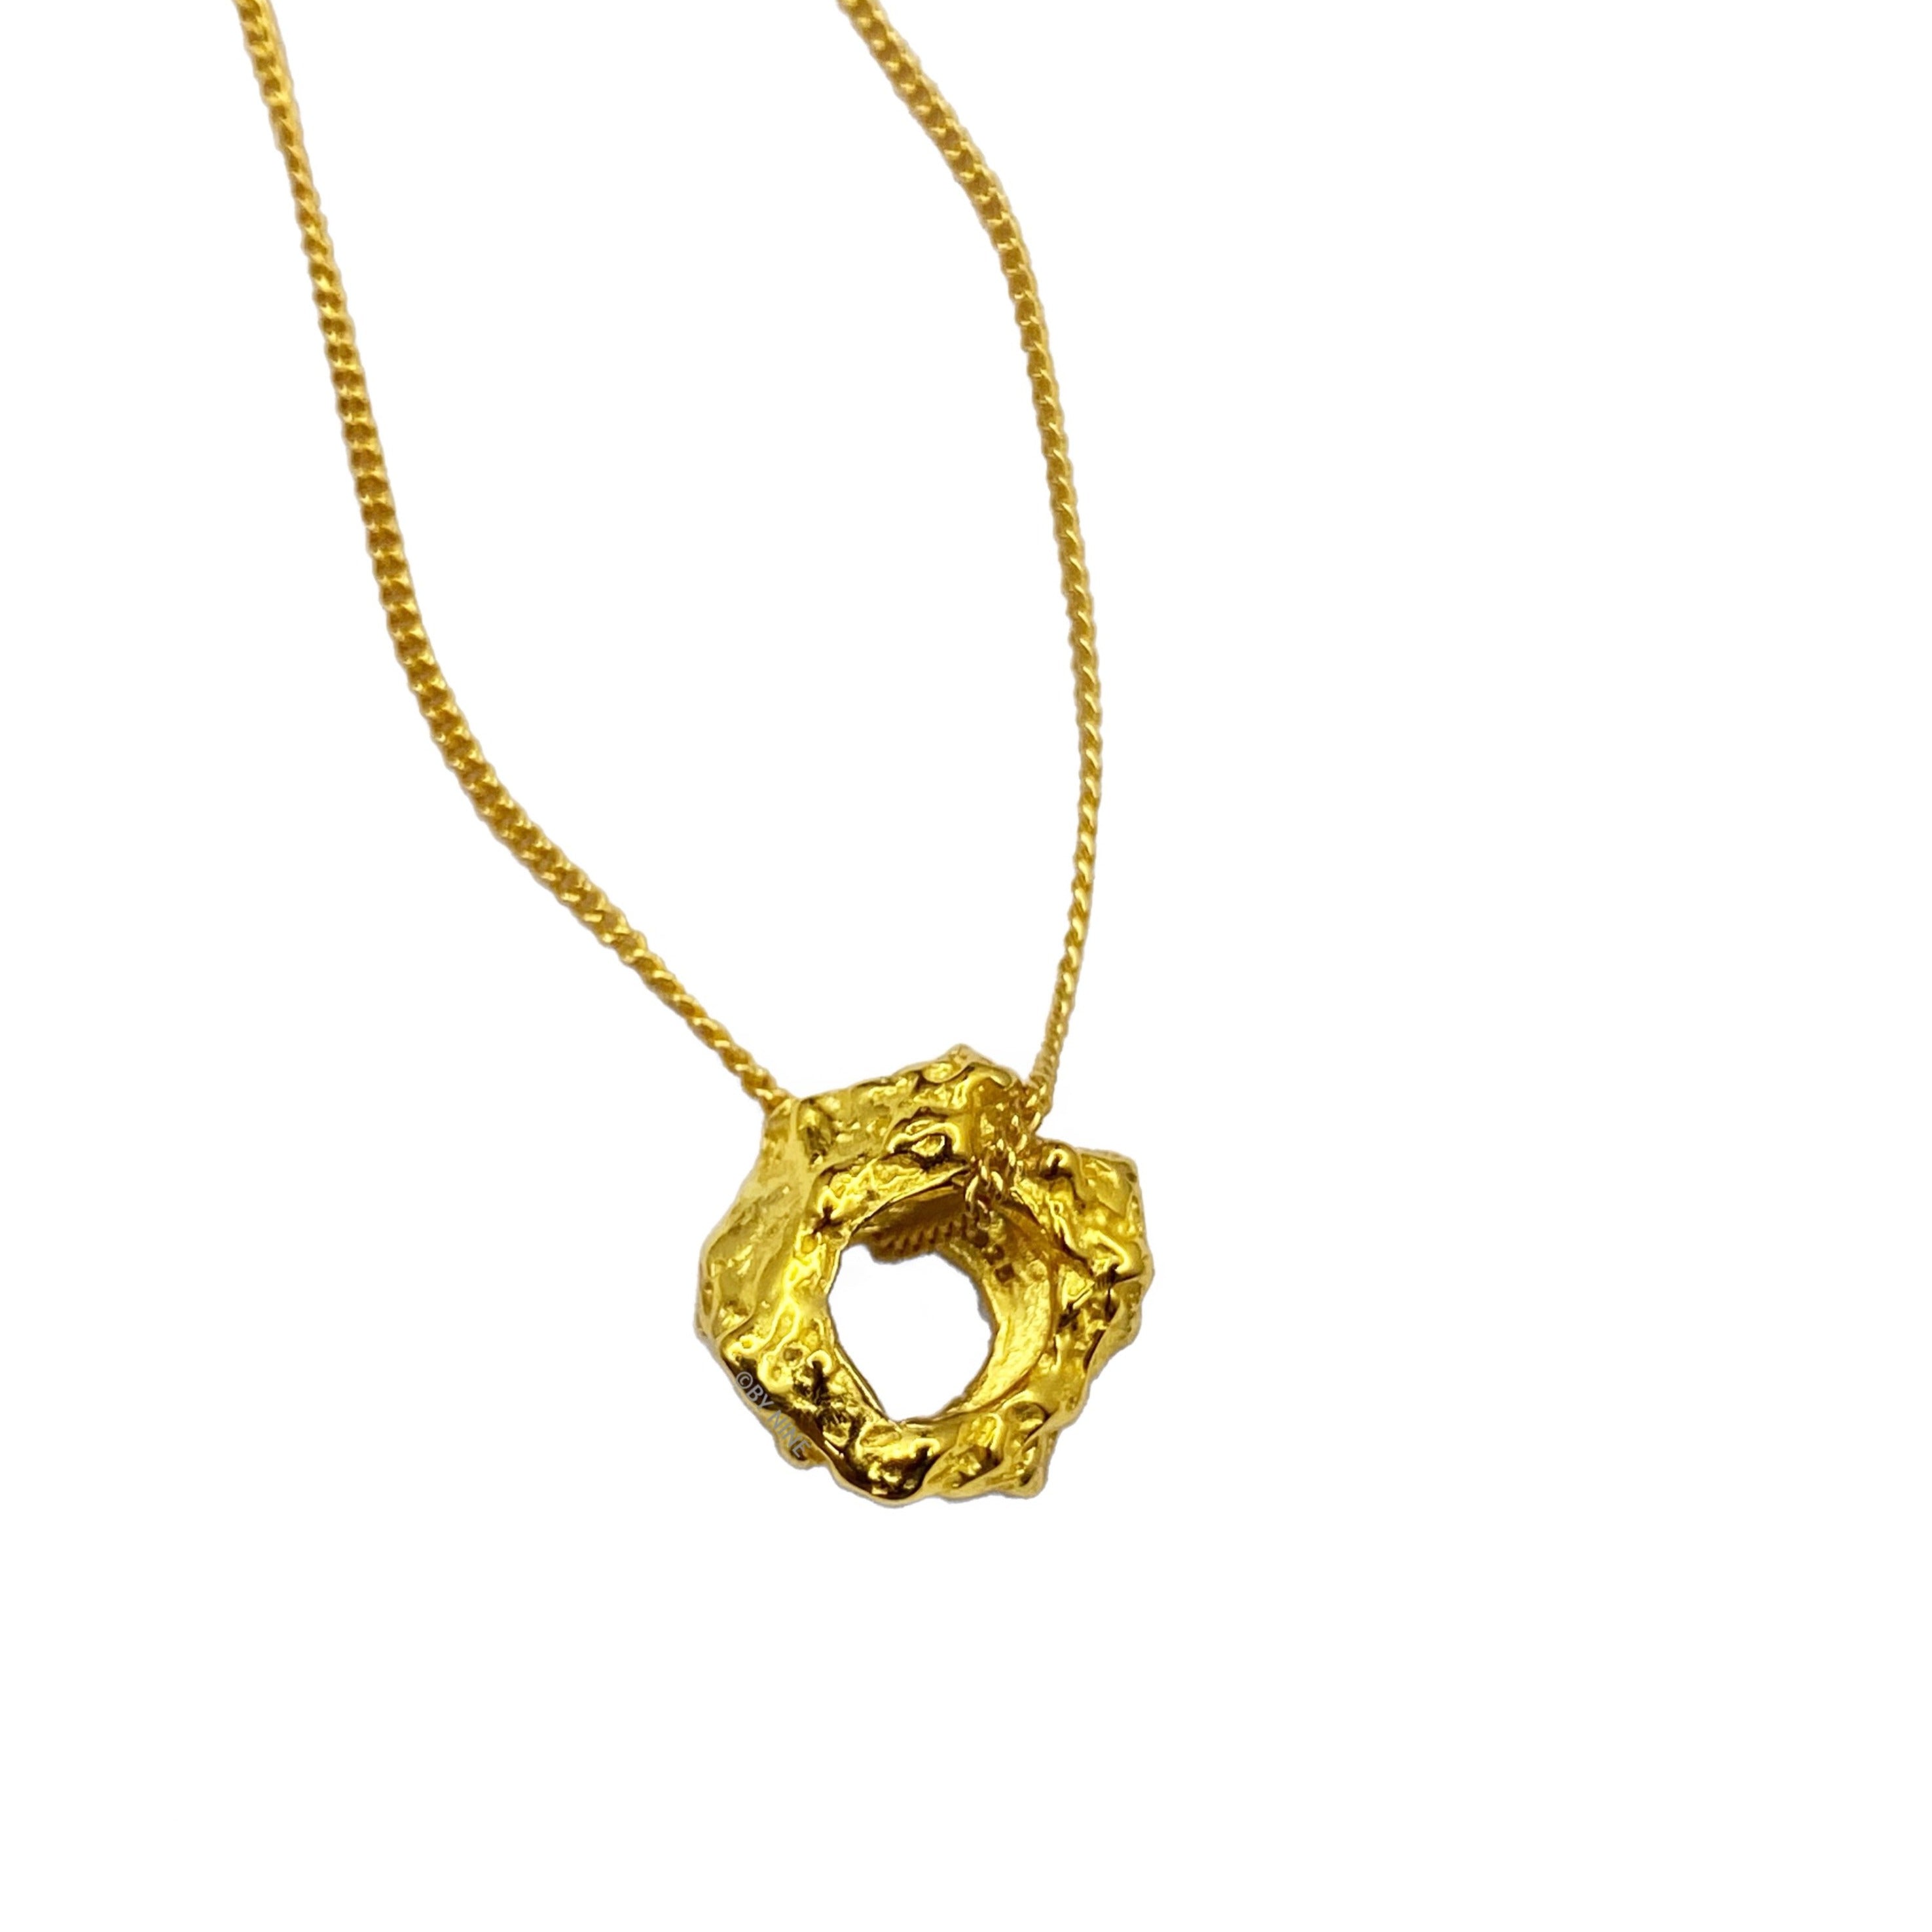 Gine necklace – By